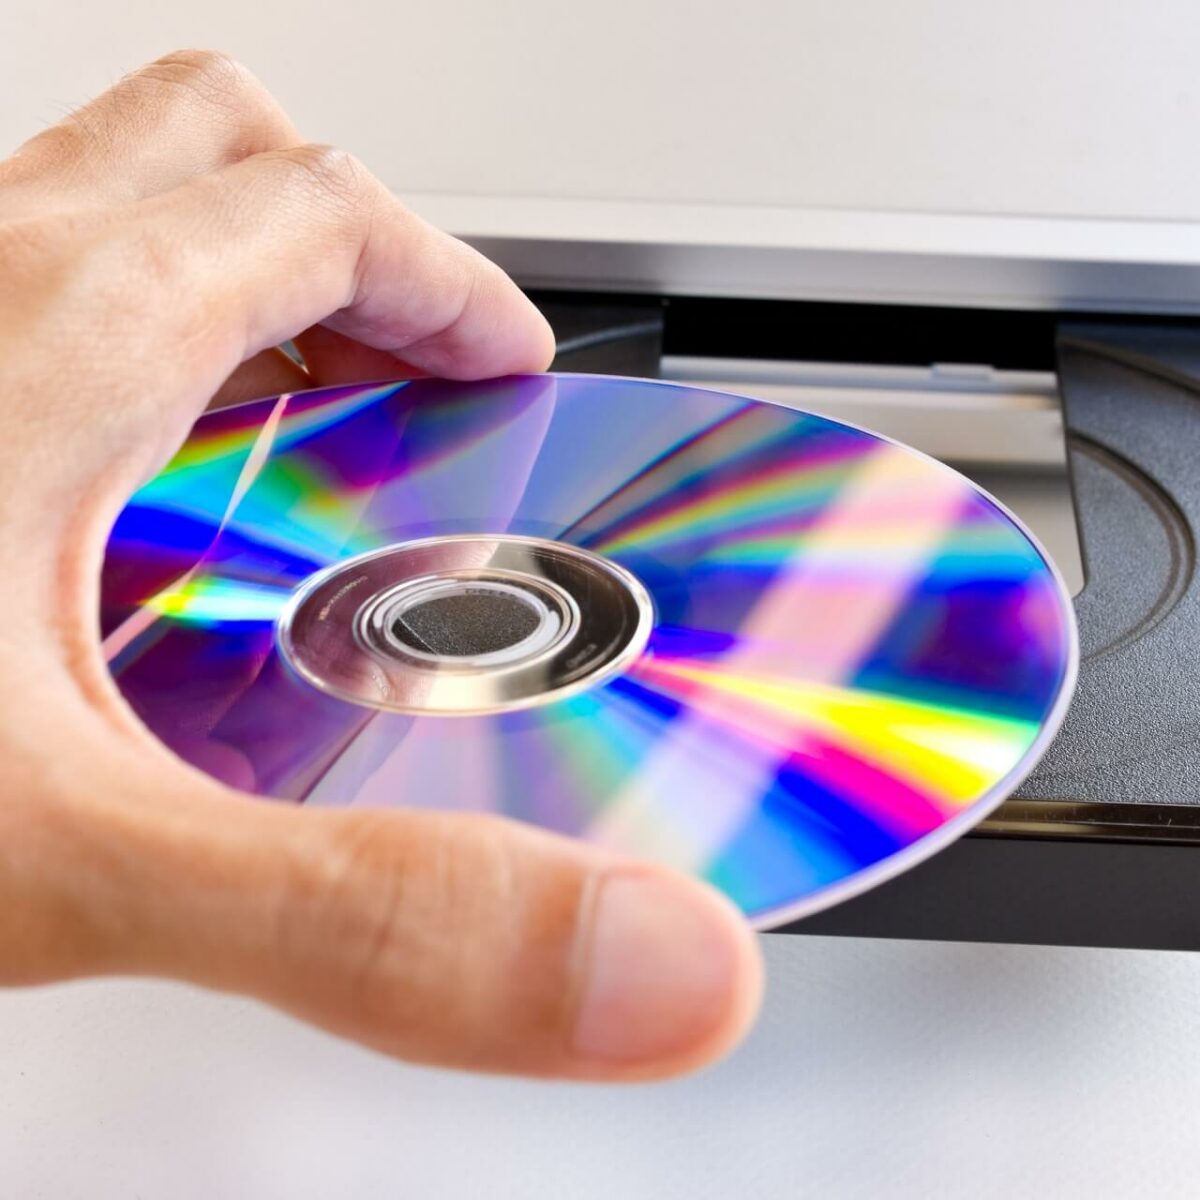 how to copy dvd to computer windows